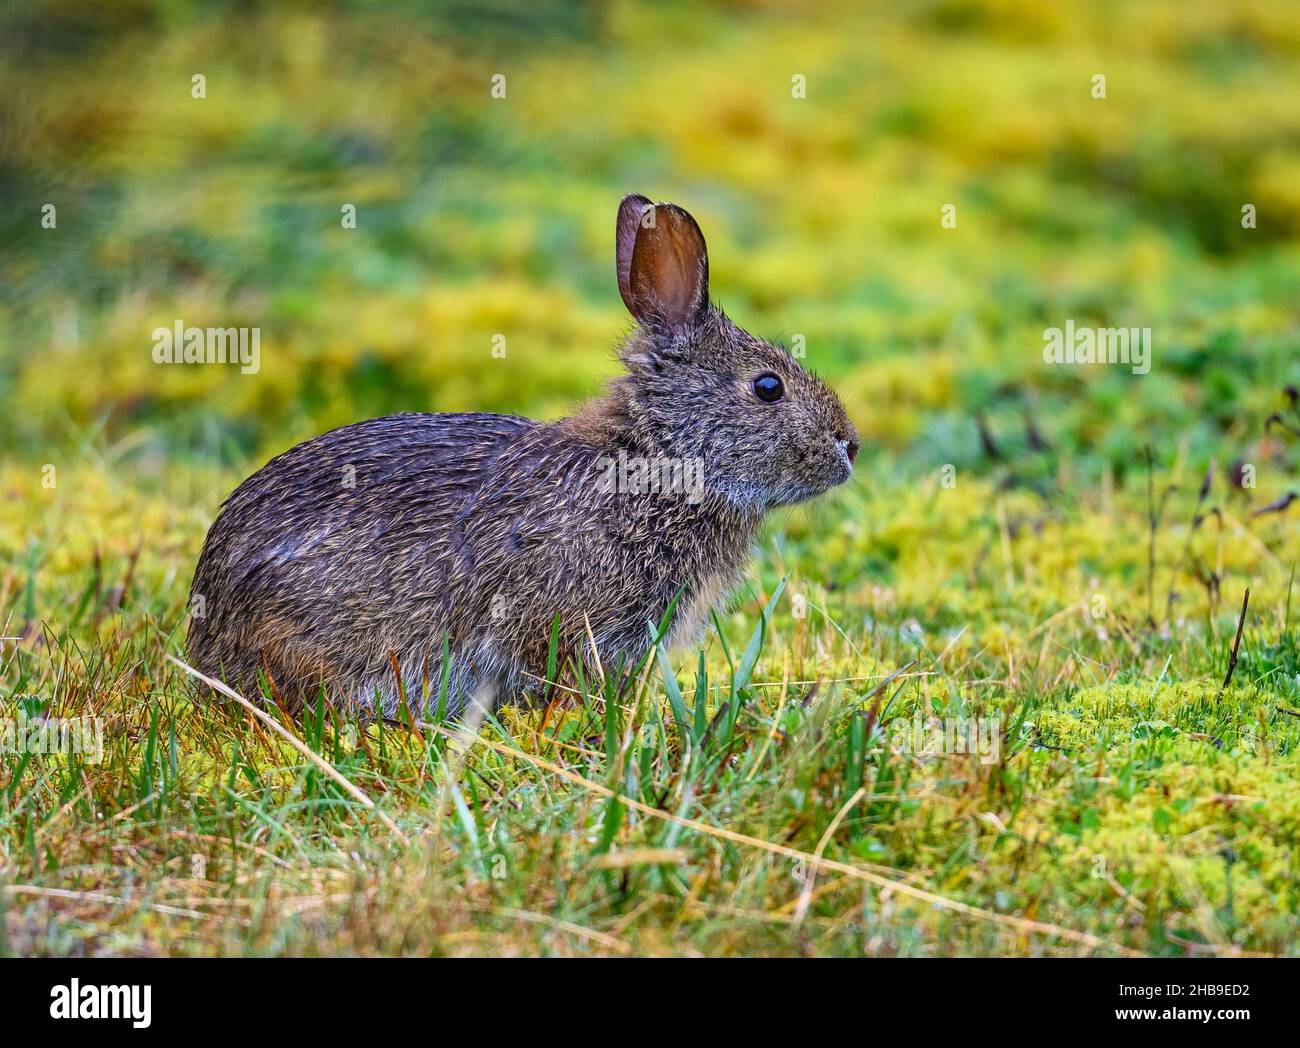 An Andean Tapeti (Sylvilagus andinus), or Andean Cottontail, is a rabbit lives in the paramo of high Andes Mountains. Cajas National Park, Ecuador. Stock Photo